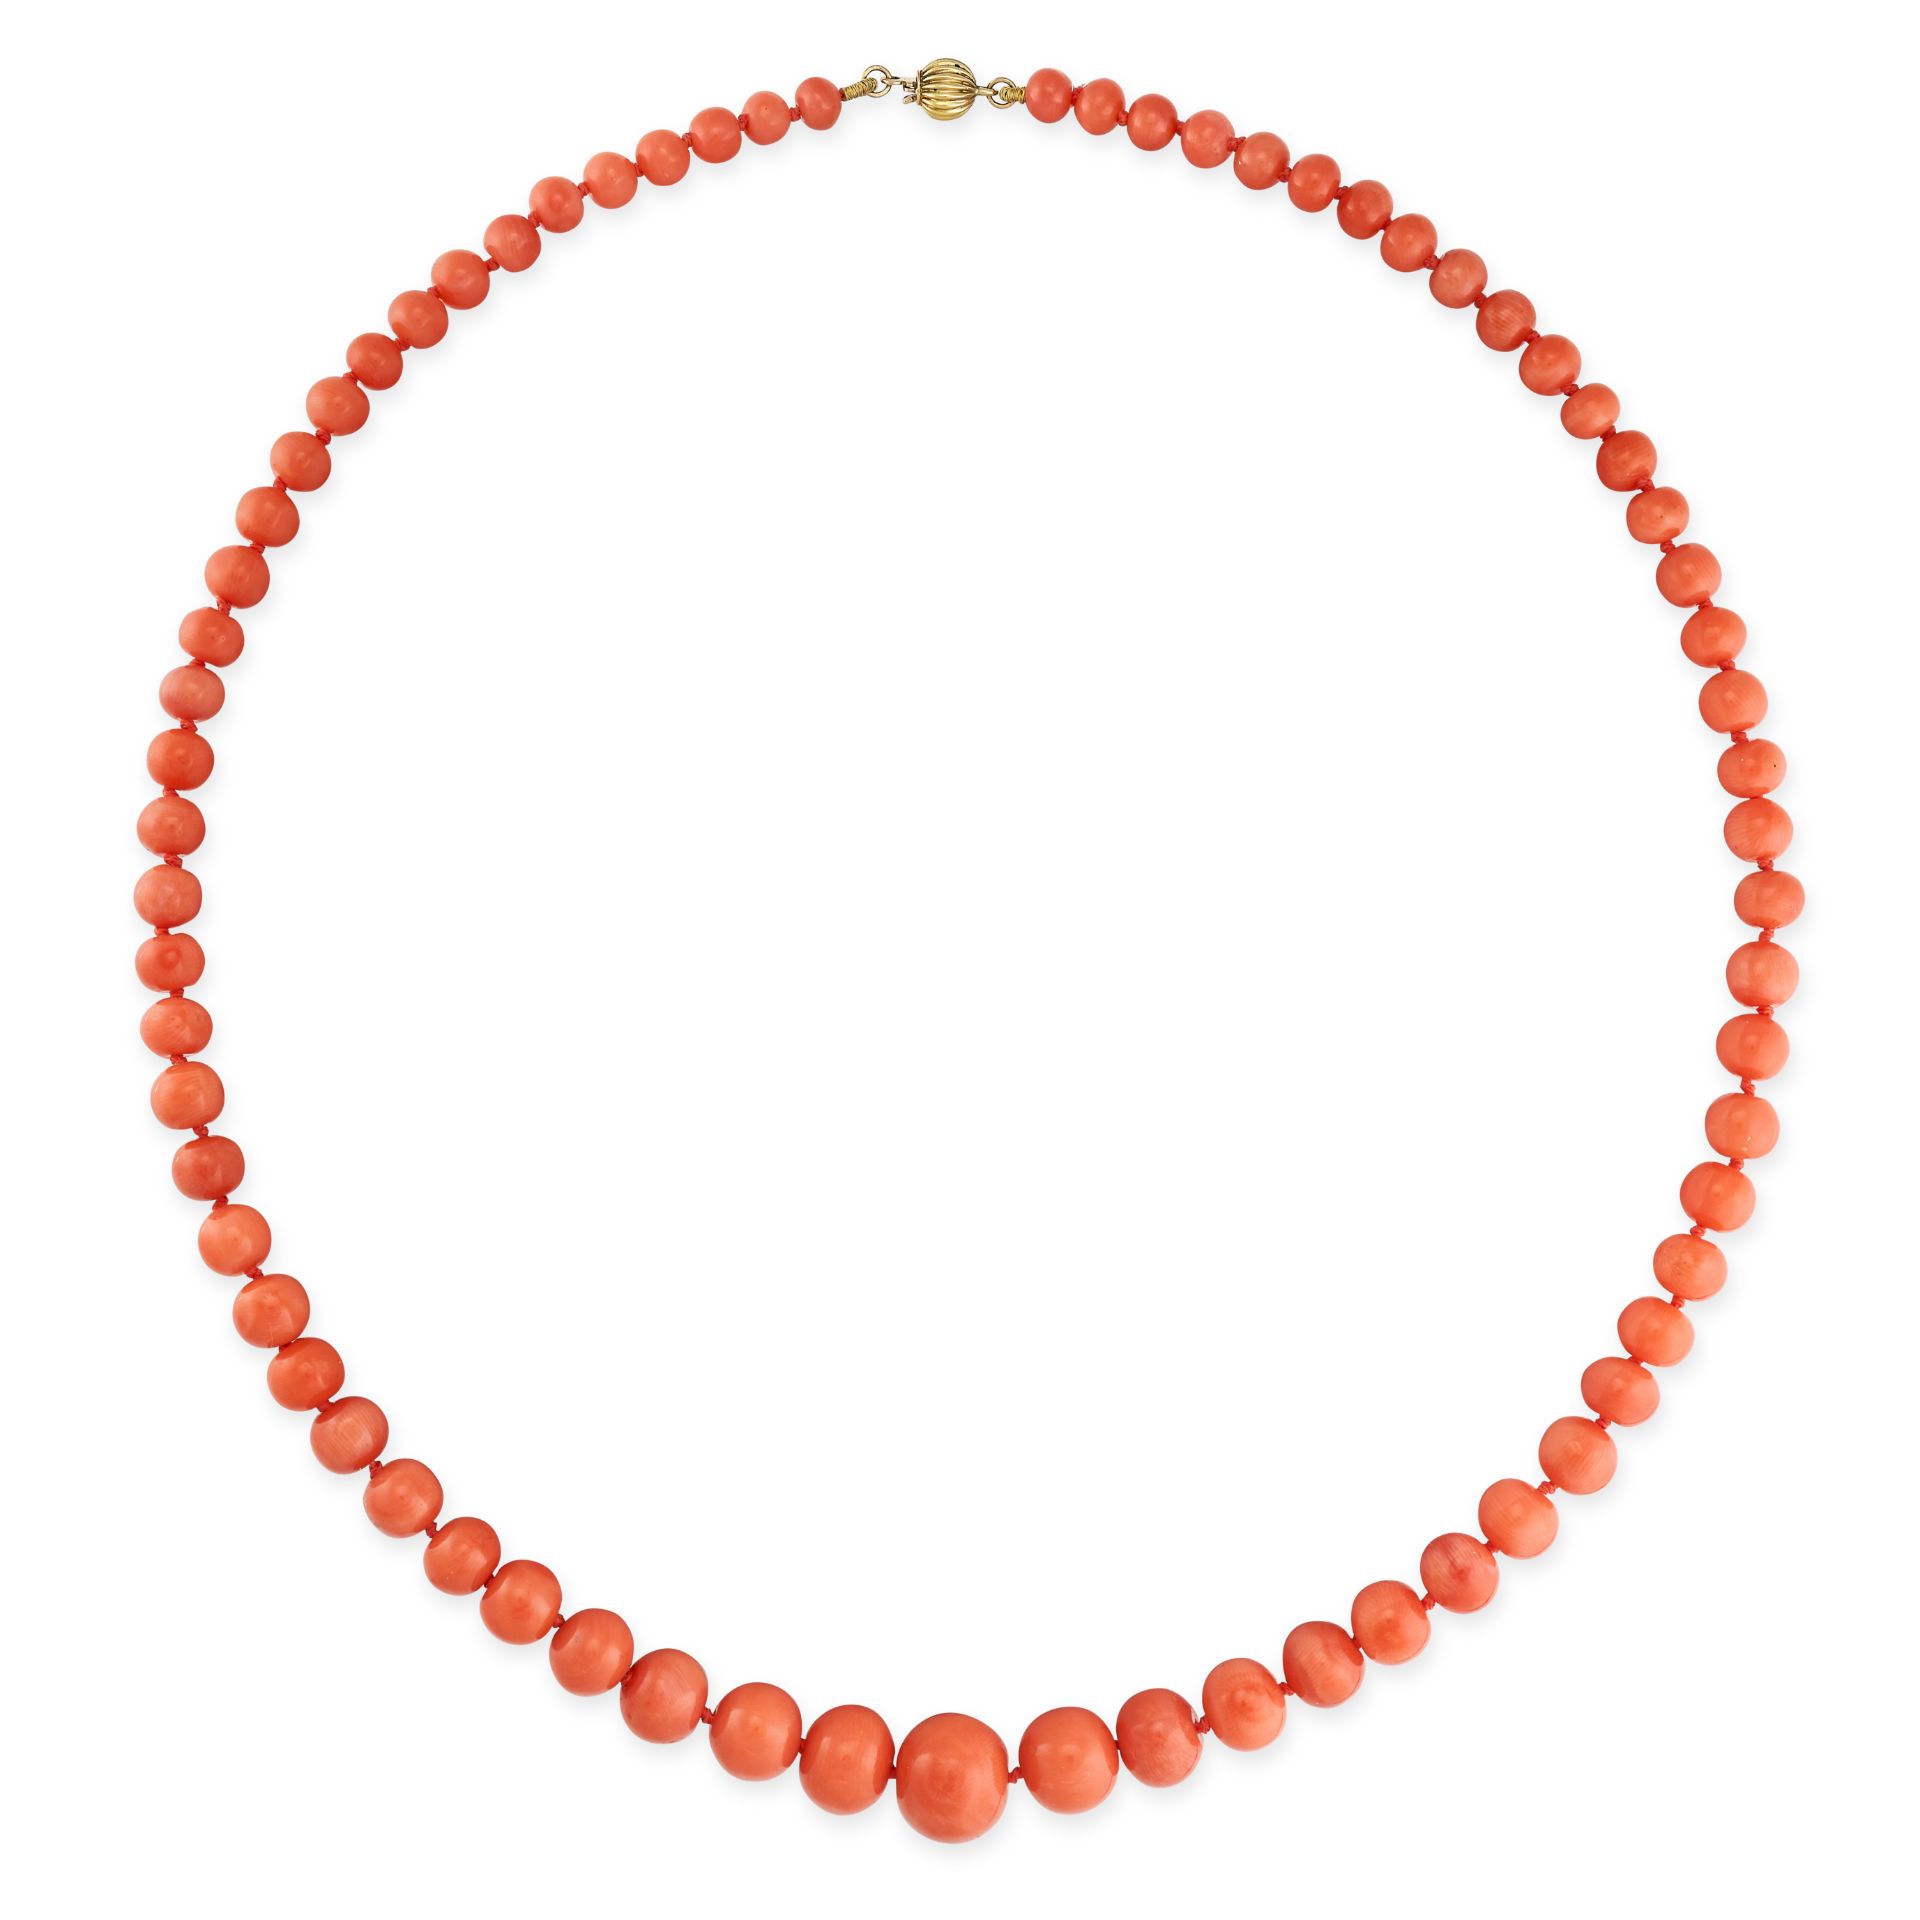 A CORAL BEAD NECKLACE  Polished coral, 5.2mm to 11.7mm  Stamped 750  Length 470mm  29.7 grams